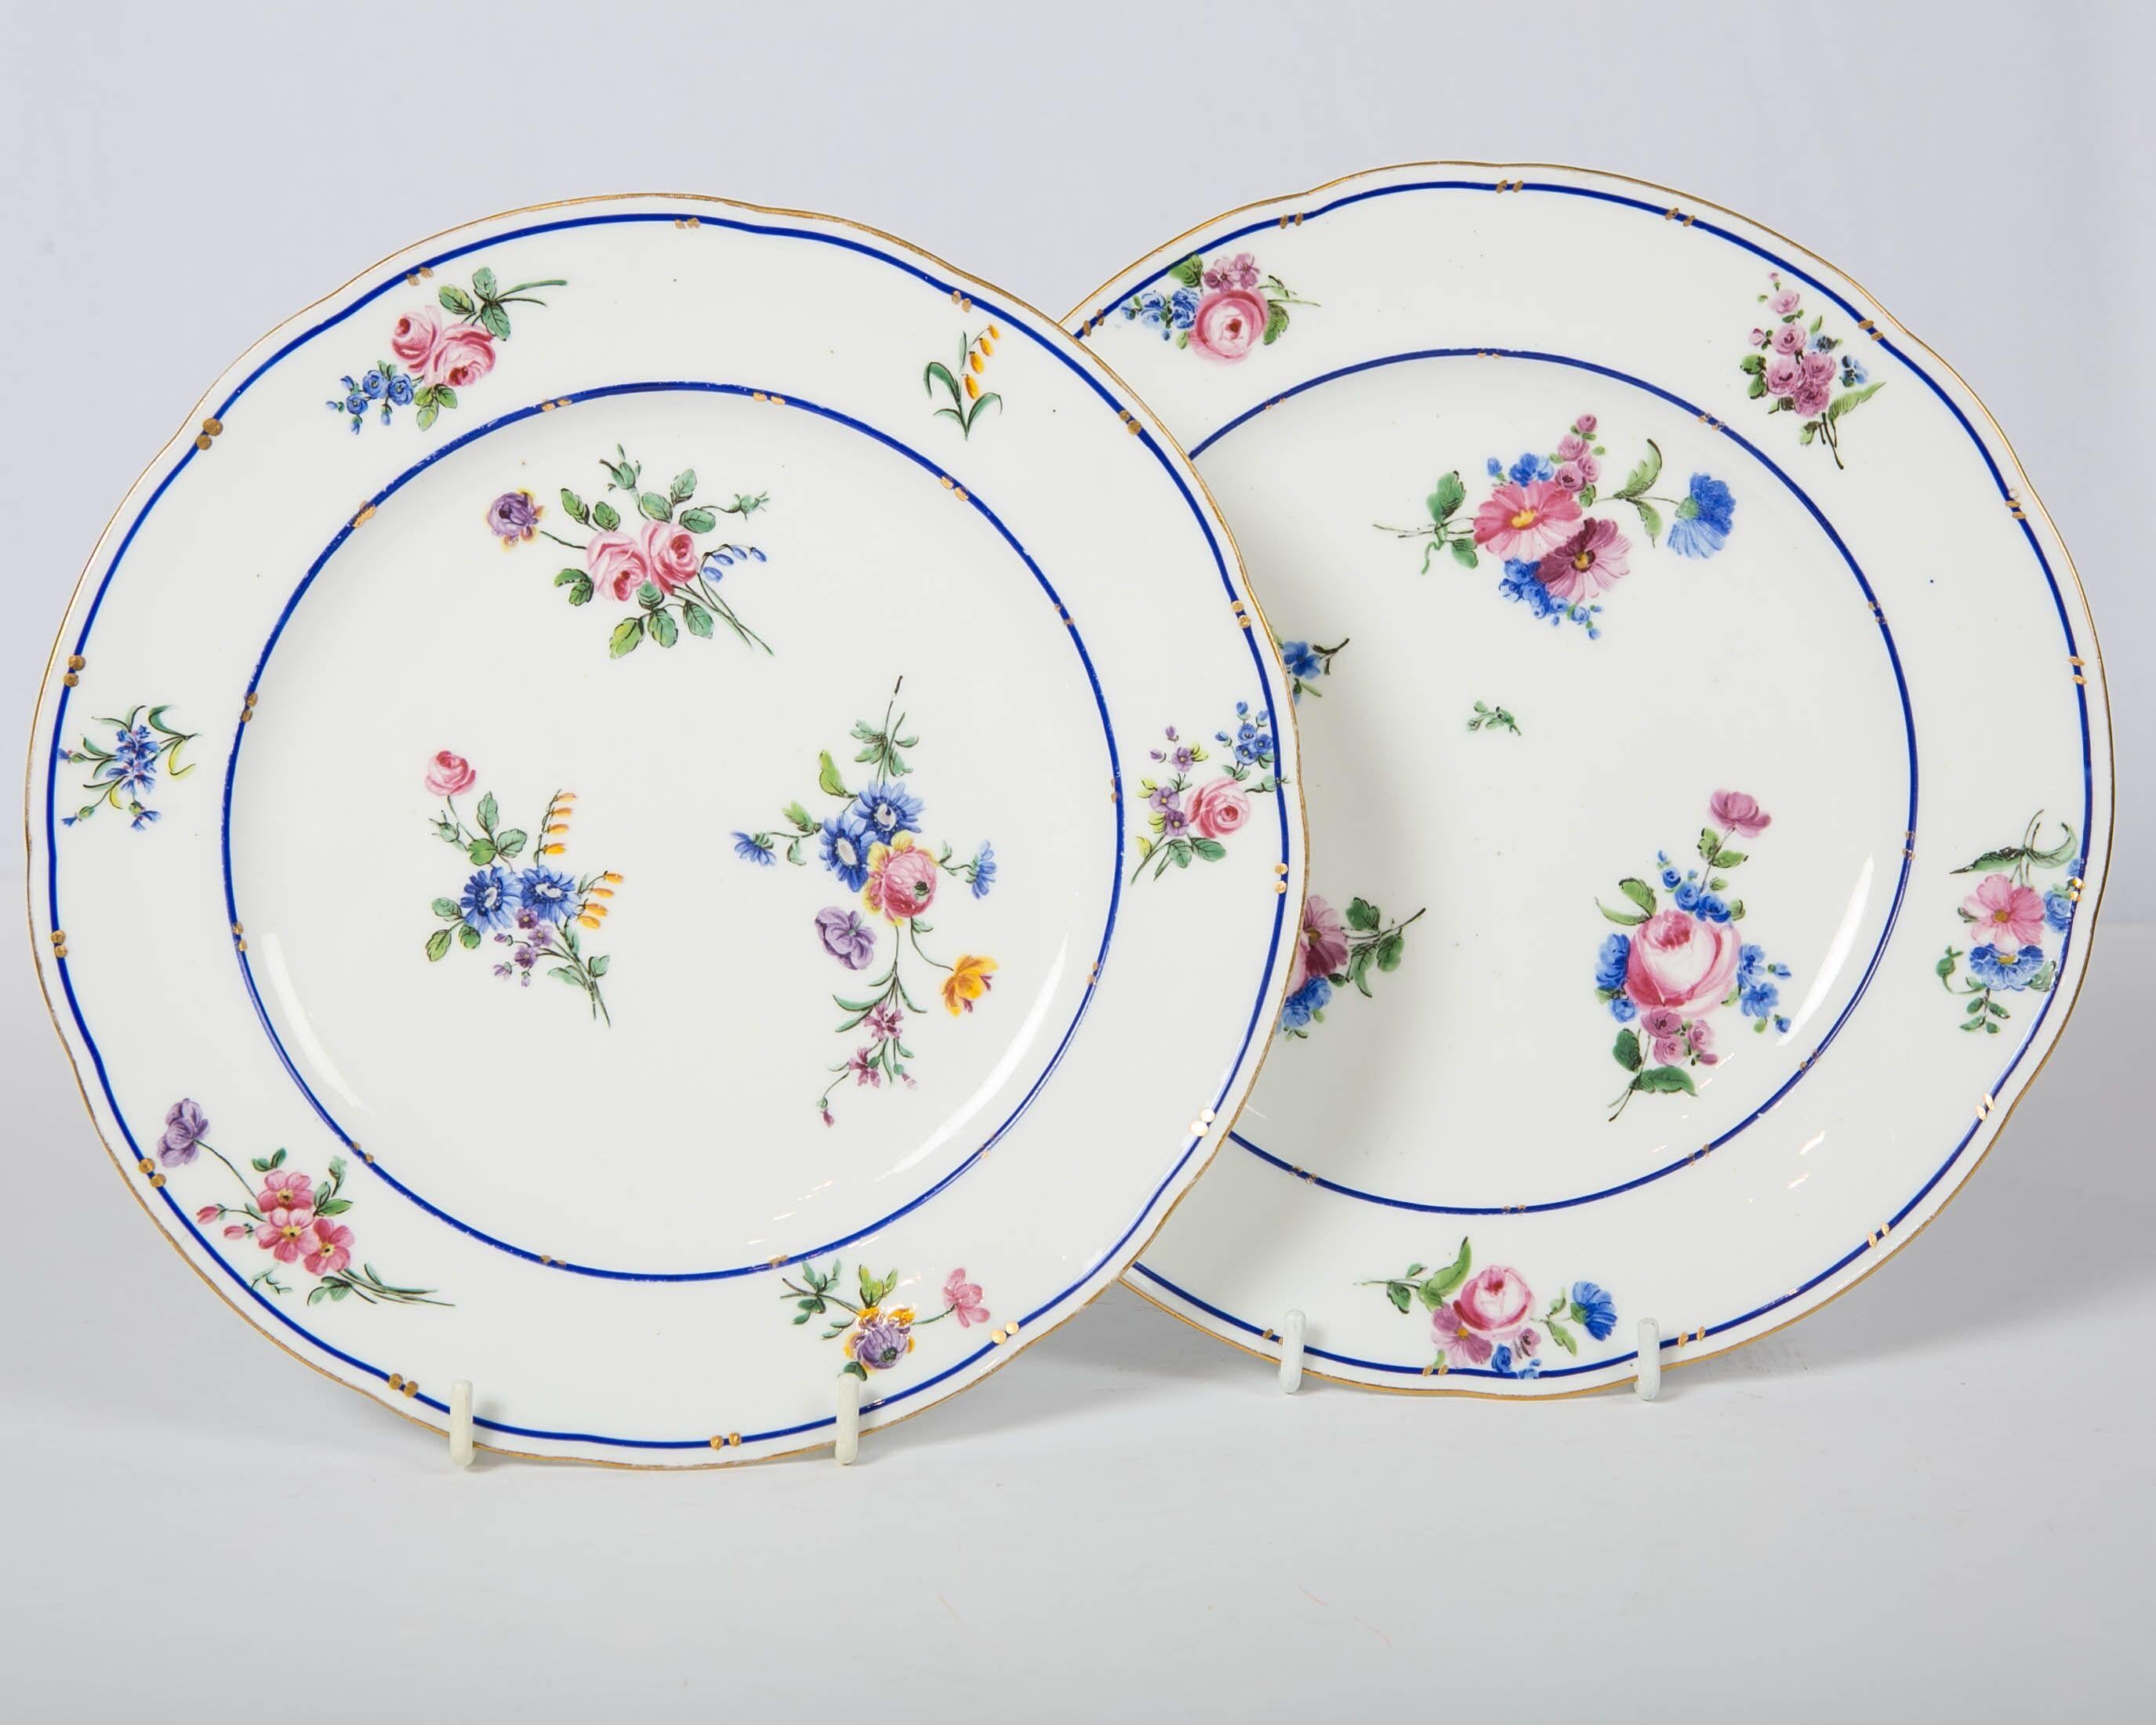 A pair of 18th century Sèvres Porcelain dishes made circa 1785. They are painted with exquisite sprays of flowers in soft pinks, blues, purple and yellow. The border and the edge are decorated with a fine enameled blue line alongside the most